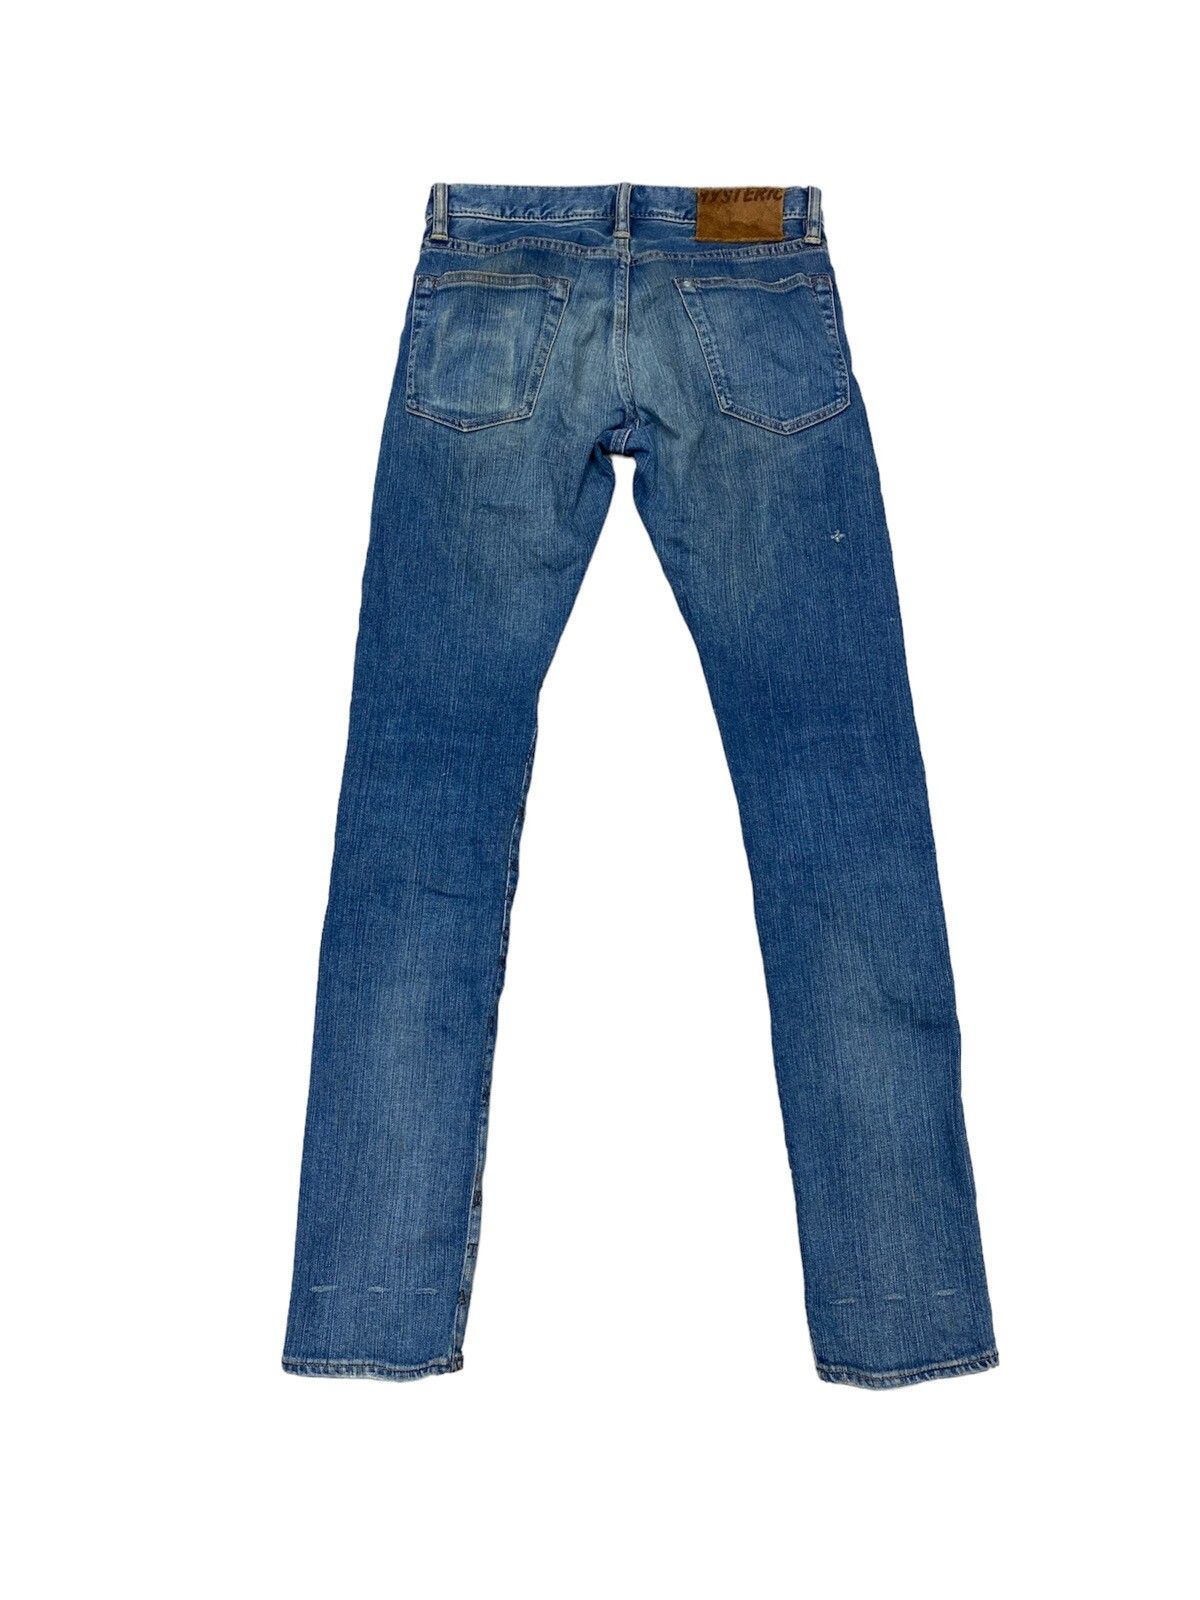 Hysteric Glamour "Do You Wanna Have Fun Tonight” Denim Jeans - 2